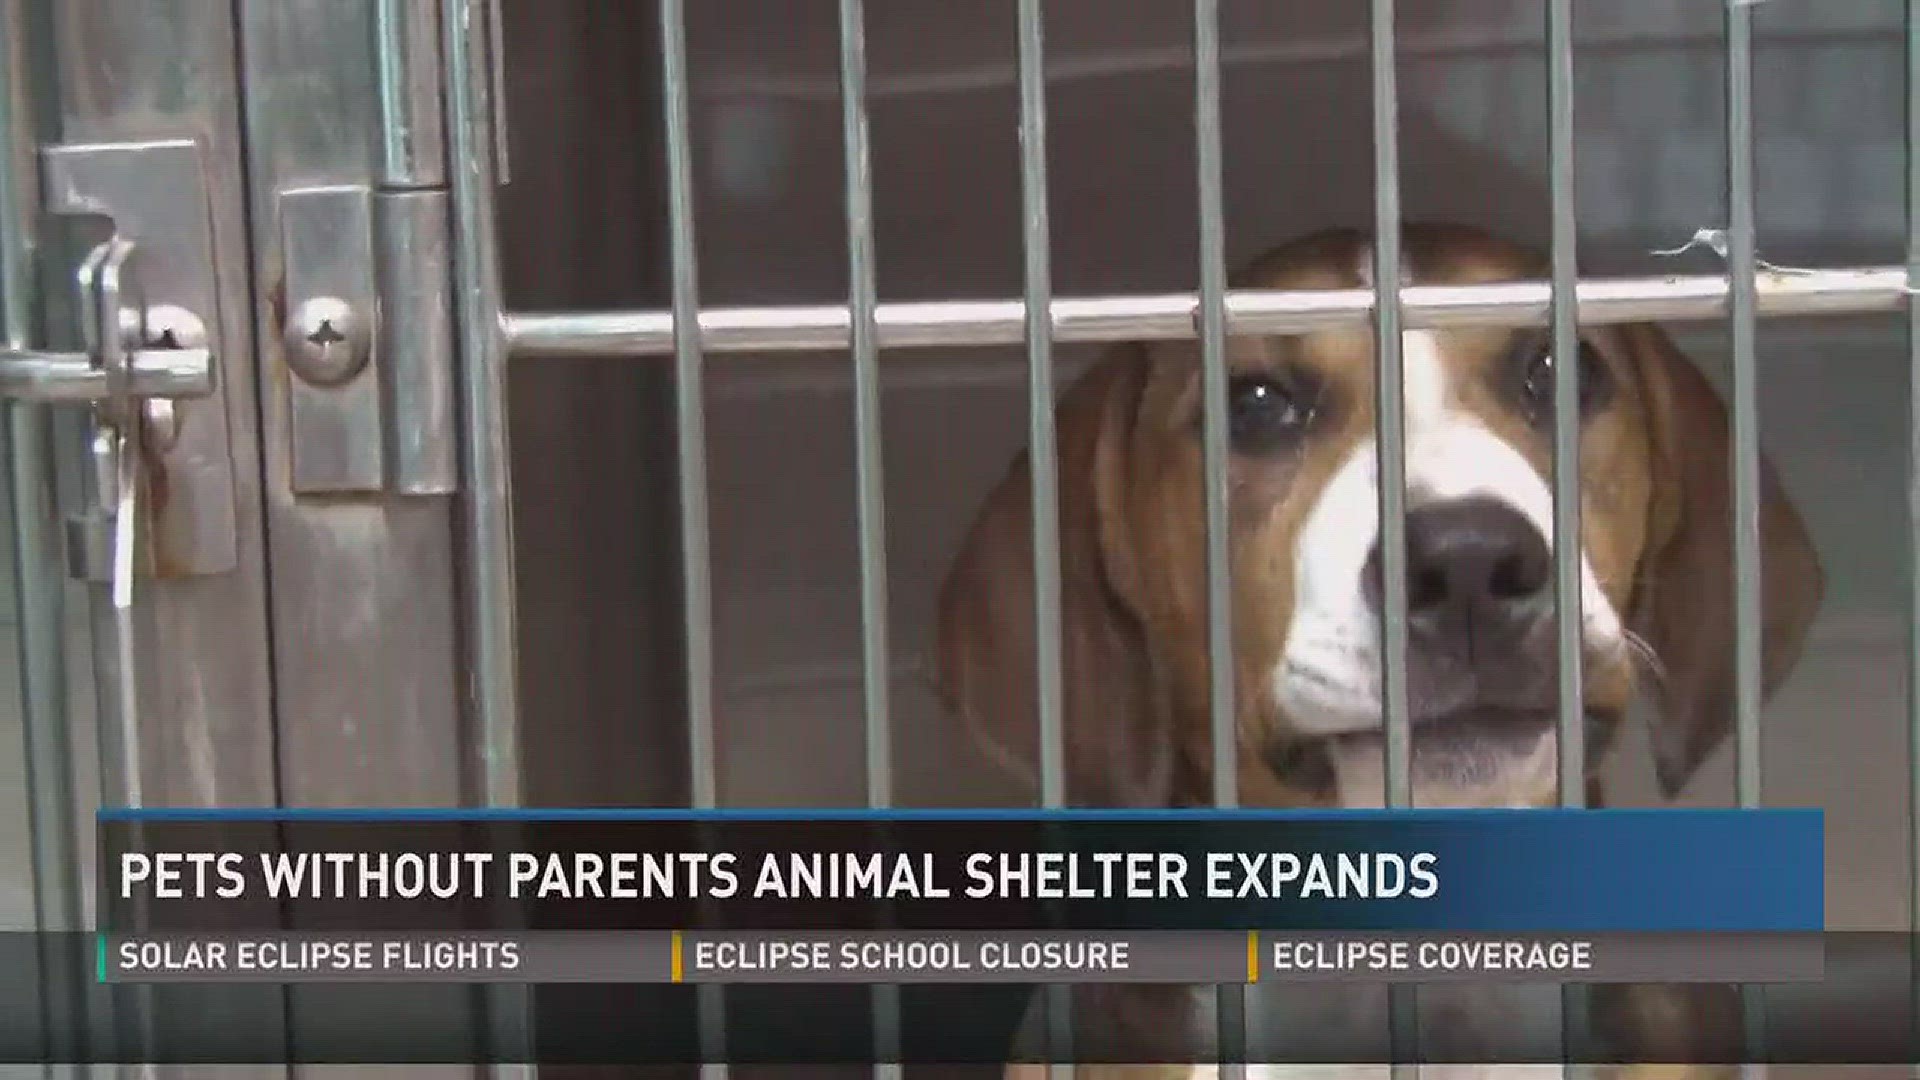 July 27, 2017: Pets Without Parents animal shelter in Sevier County is working to build a new facility to house an influx of animals.